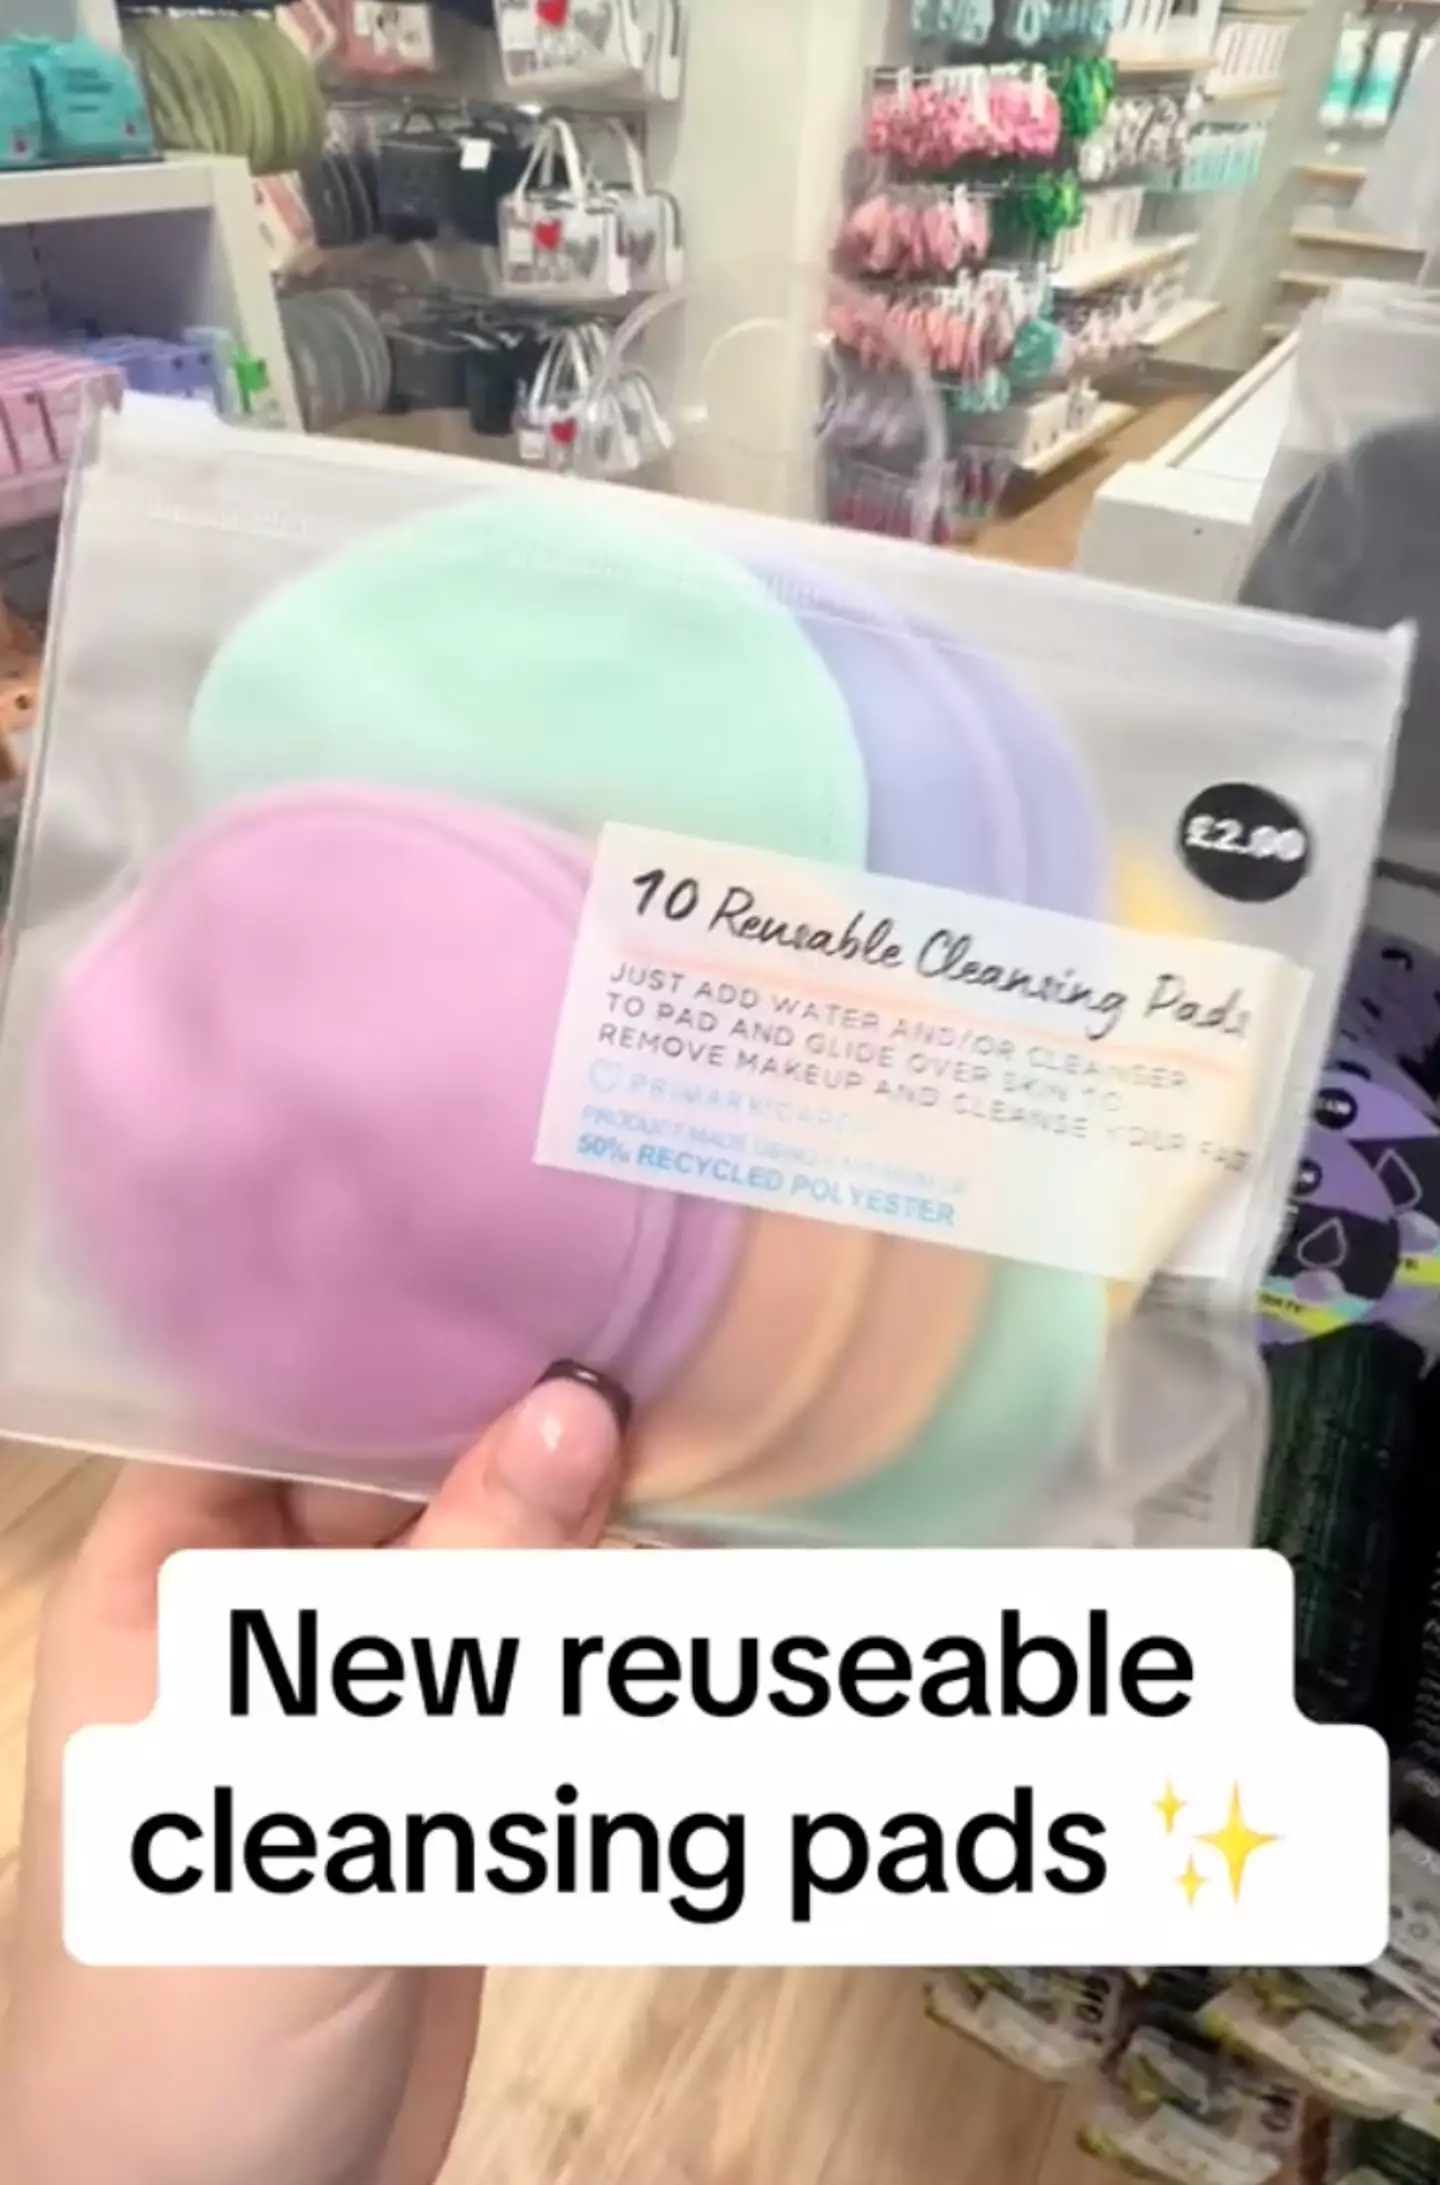 Reusable cleansing pads have been offered to shoppers as a more 'sustainable' alternative.